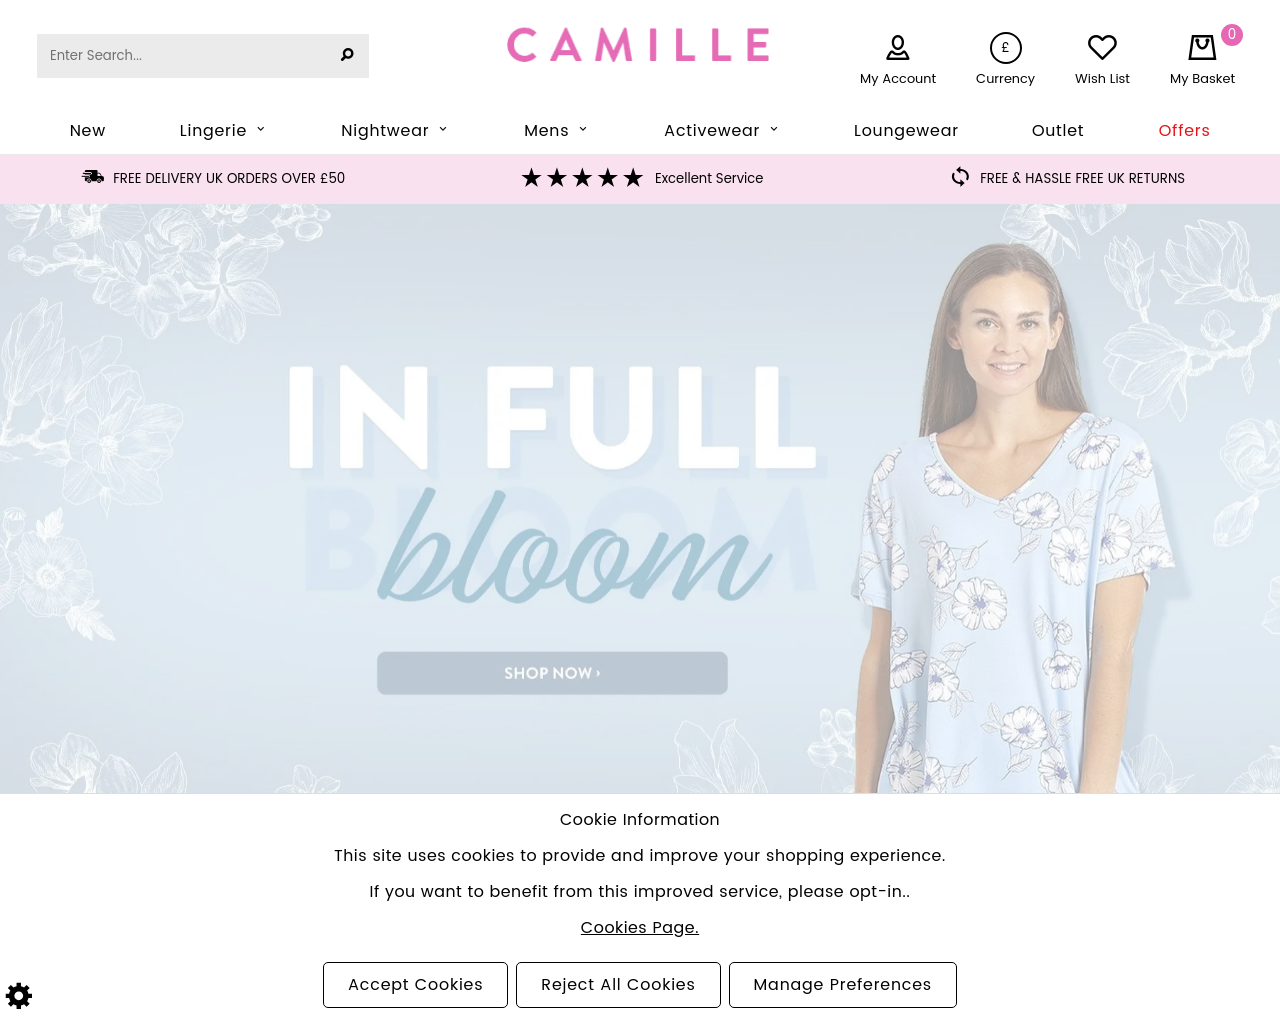 camille.co.uk